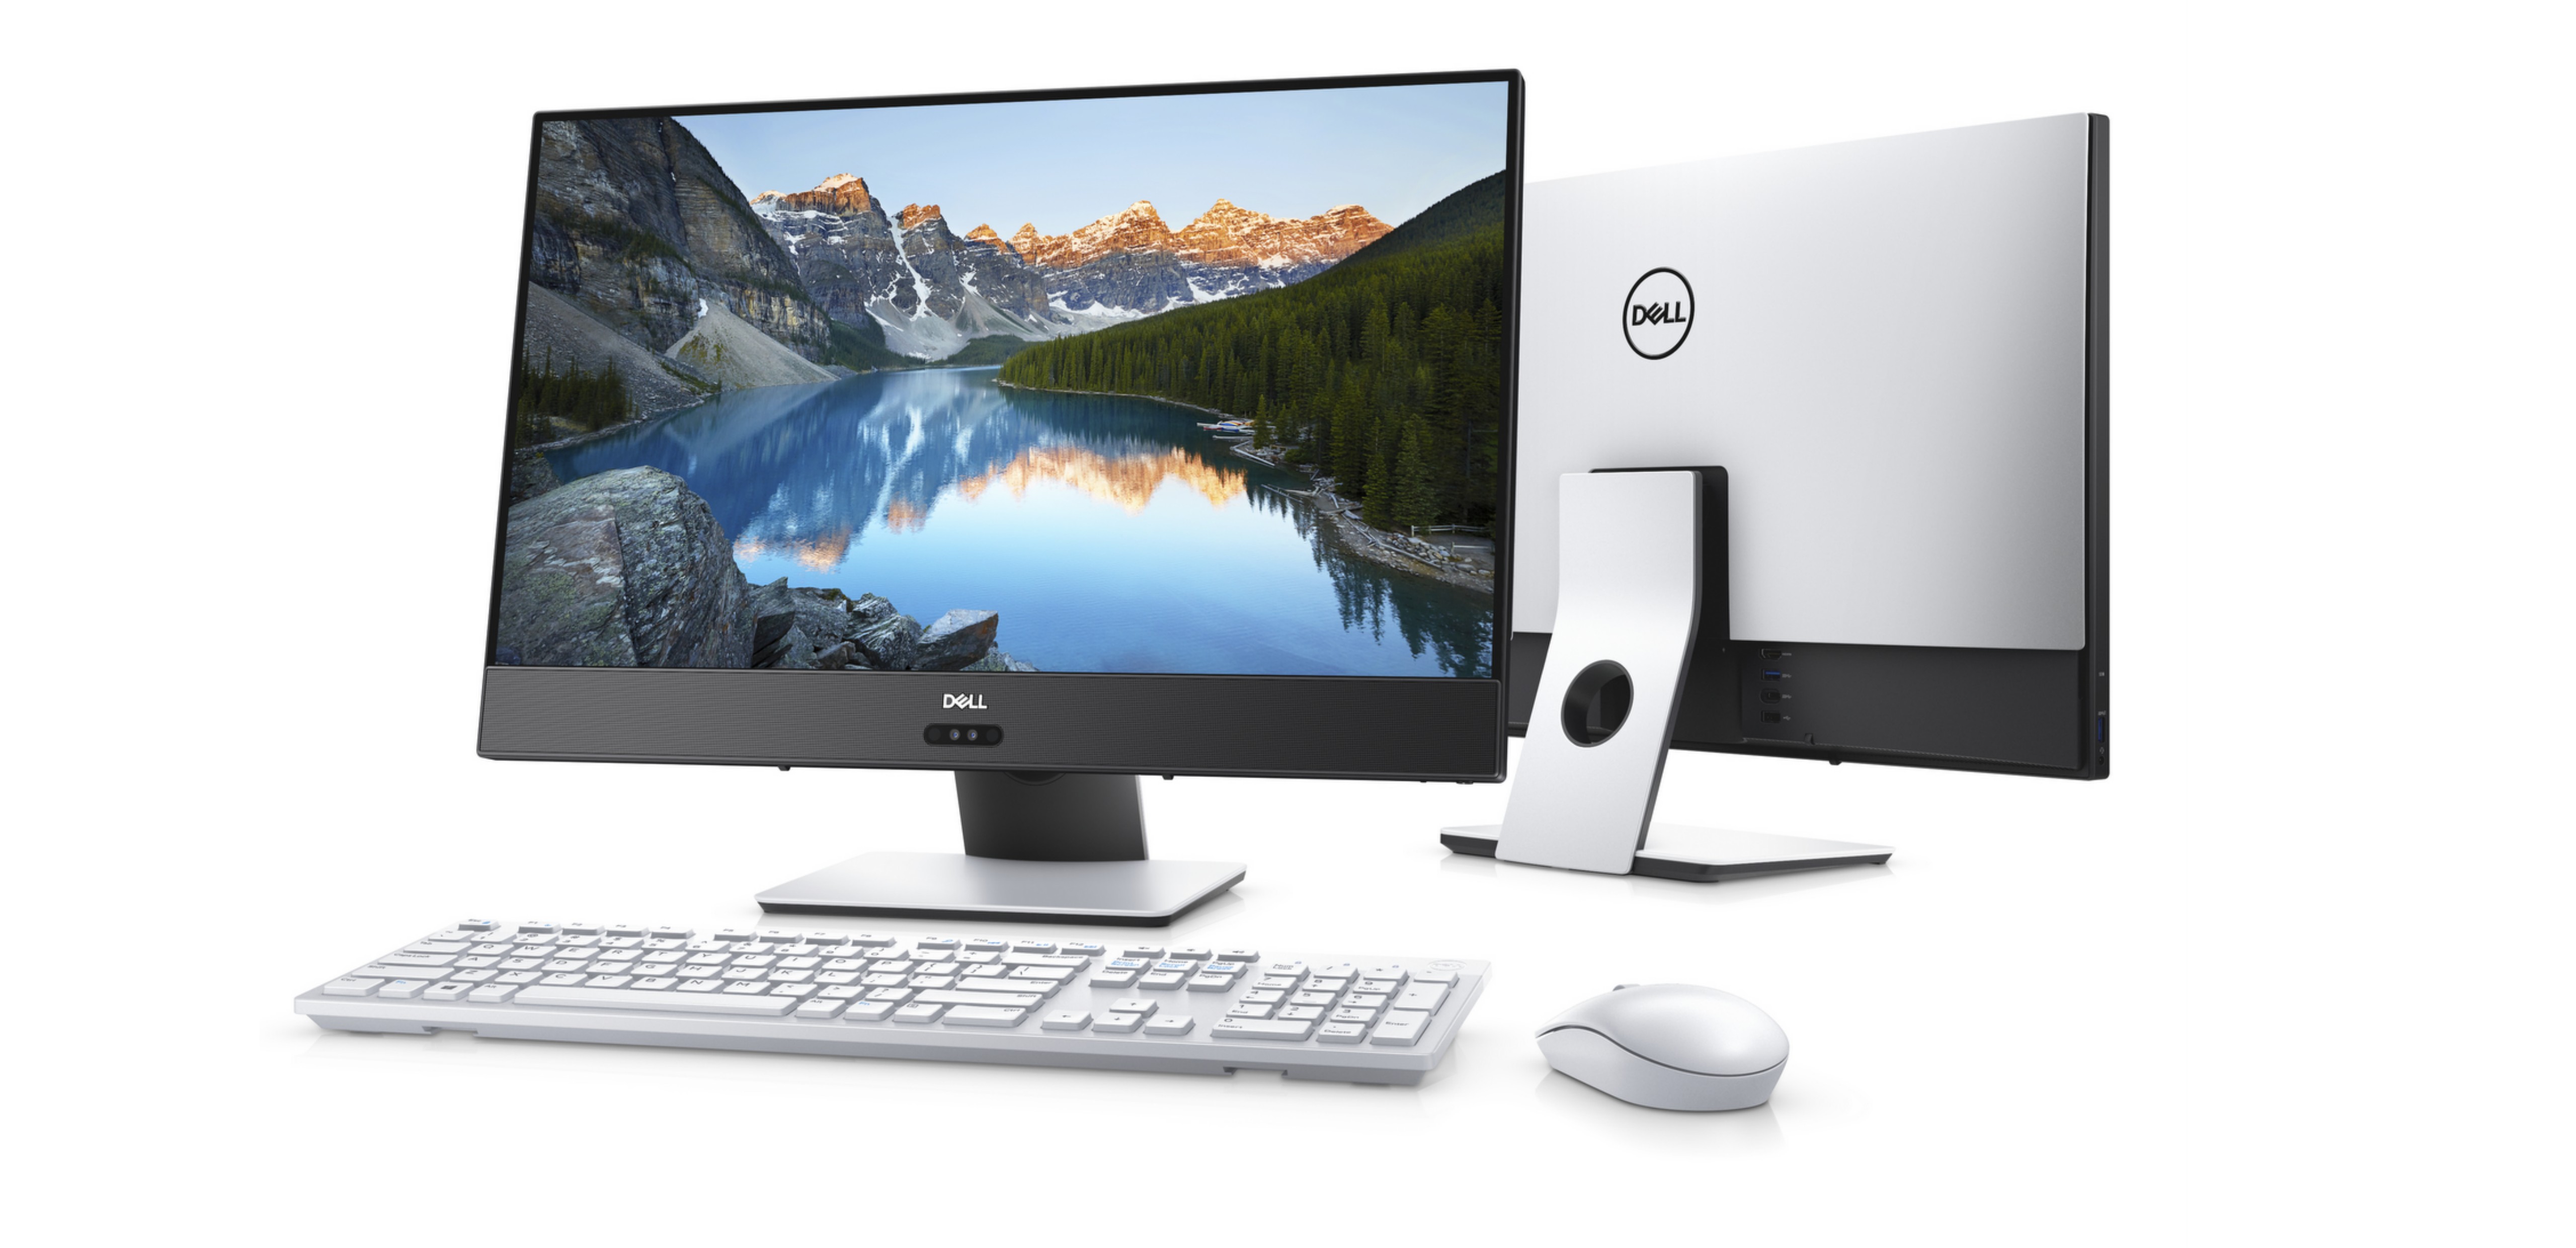 Dell debuts new Inspiron AIOs and VR gaming desktop with Windows 10, including this INSPIRON 24 5000 AIO with Windows 10